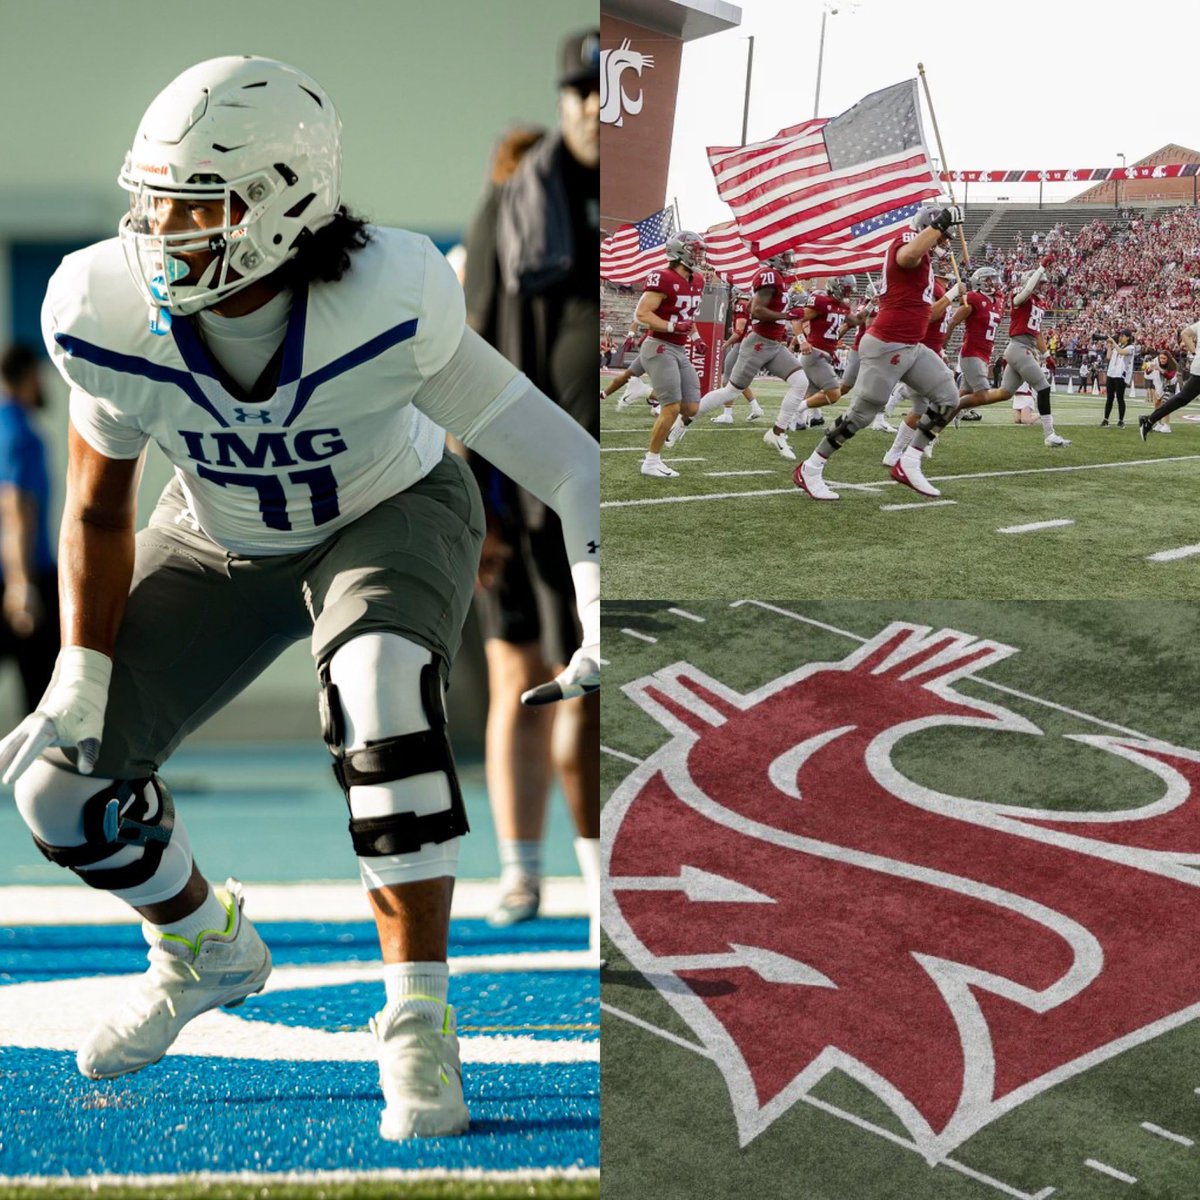 I am extremely blessed and humbled to say that I have received an offer from Washington State @WSUCougarFB @COACHSTACE_ @LacedfactDreams @adamgorney @demetricDWarren @TheUCReport @Scott_Schrader @Zack_poff_MP @GregBiggins @CraigHaubert @dzoloty @BrandonHuffman @JeremyO_Johnson